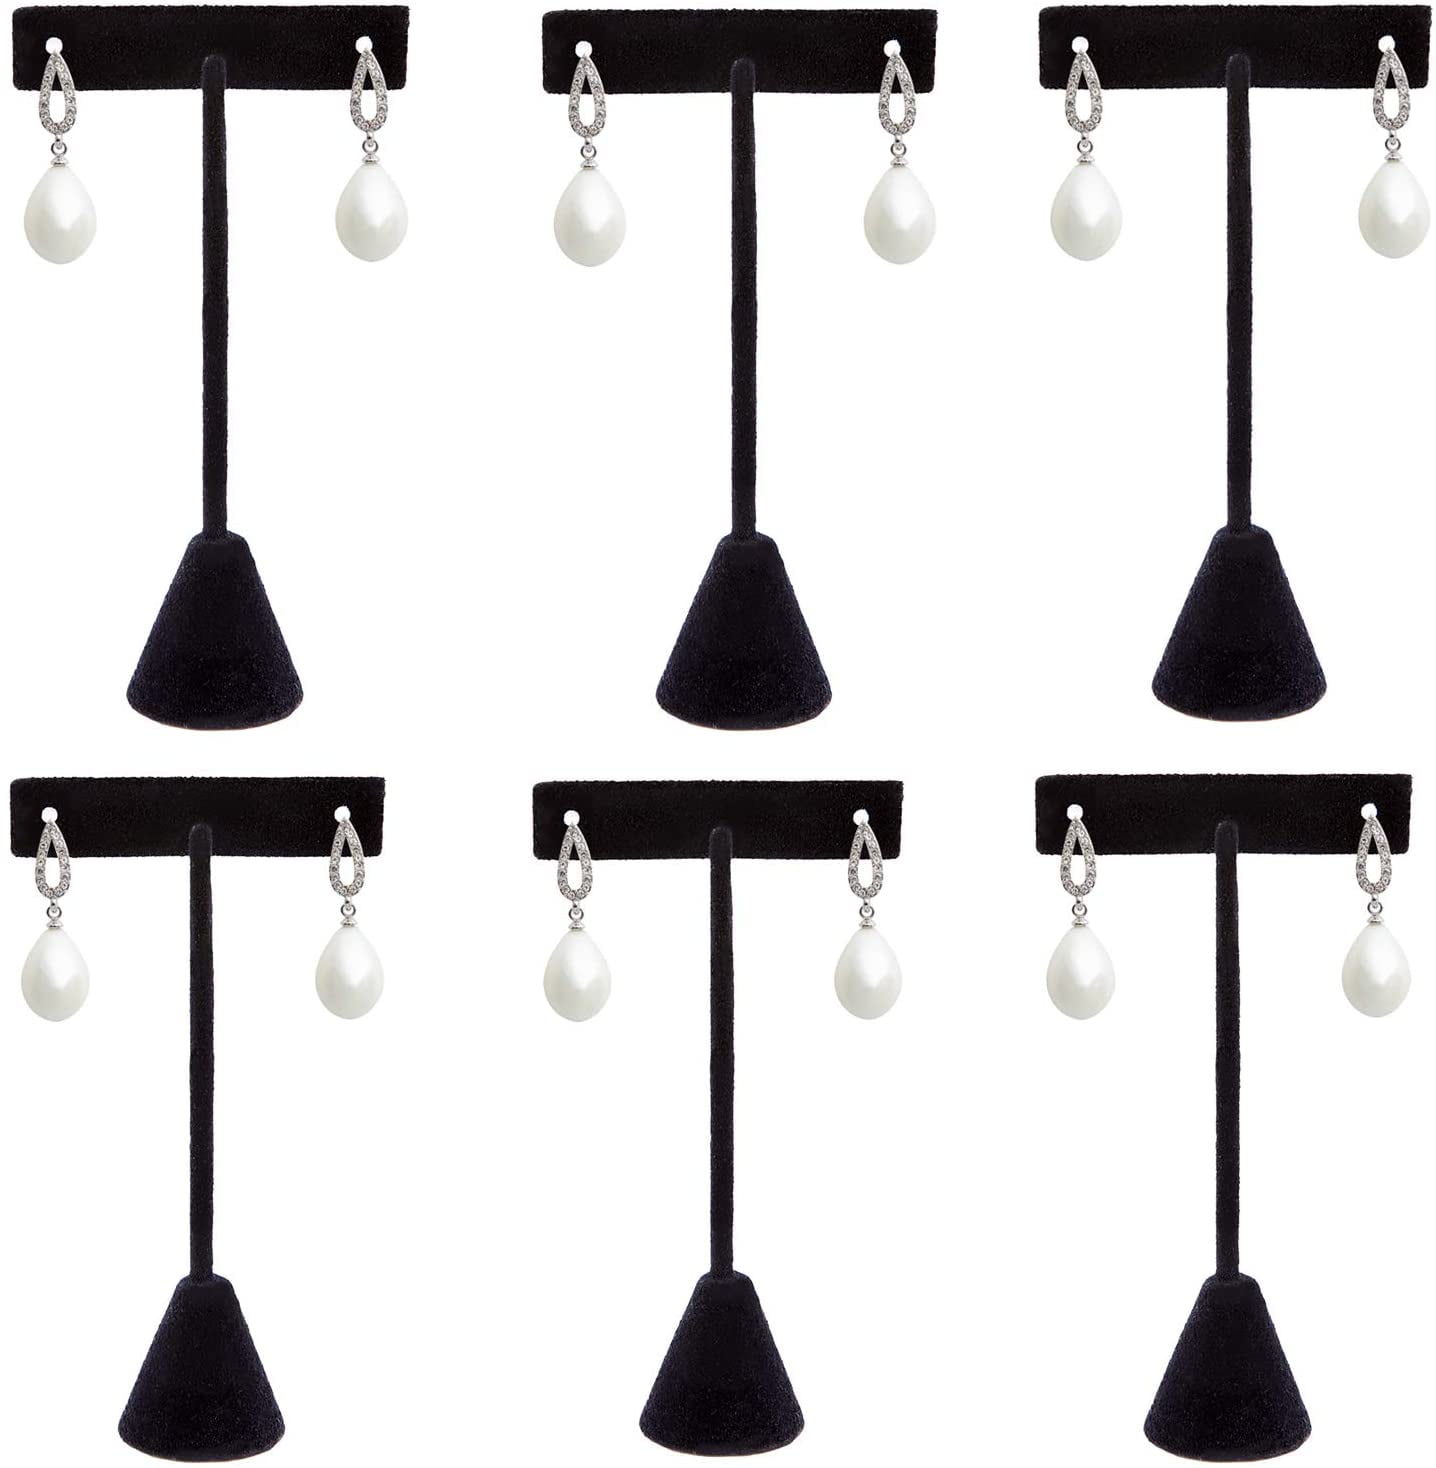  VENVSBEE Earring Display Stands for Selling, Earring